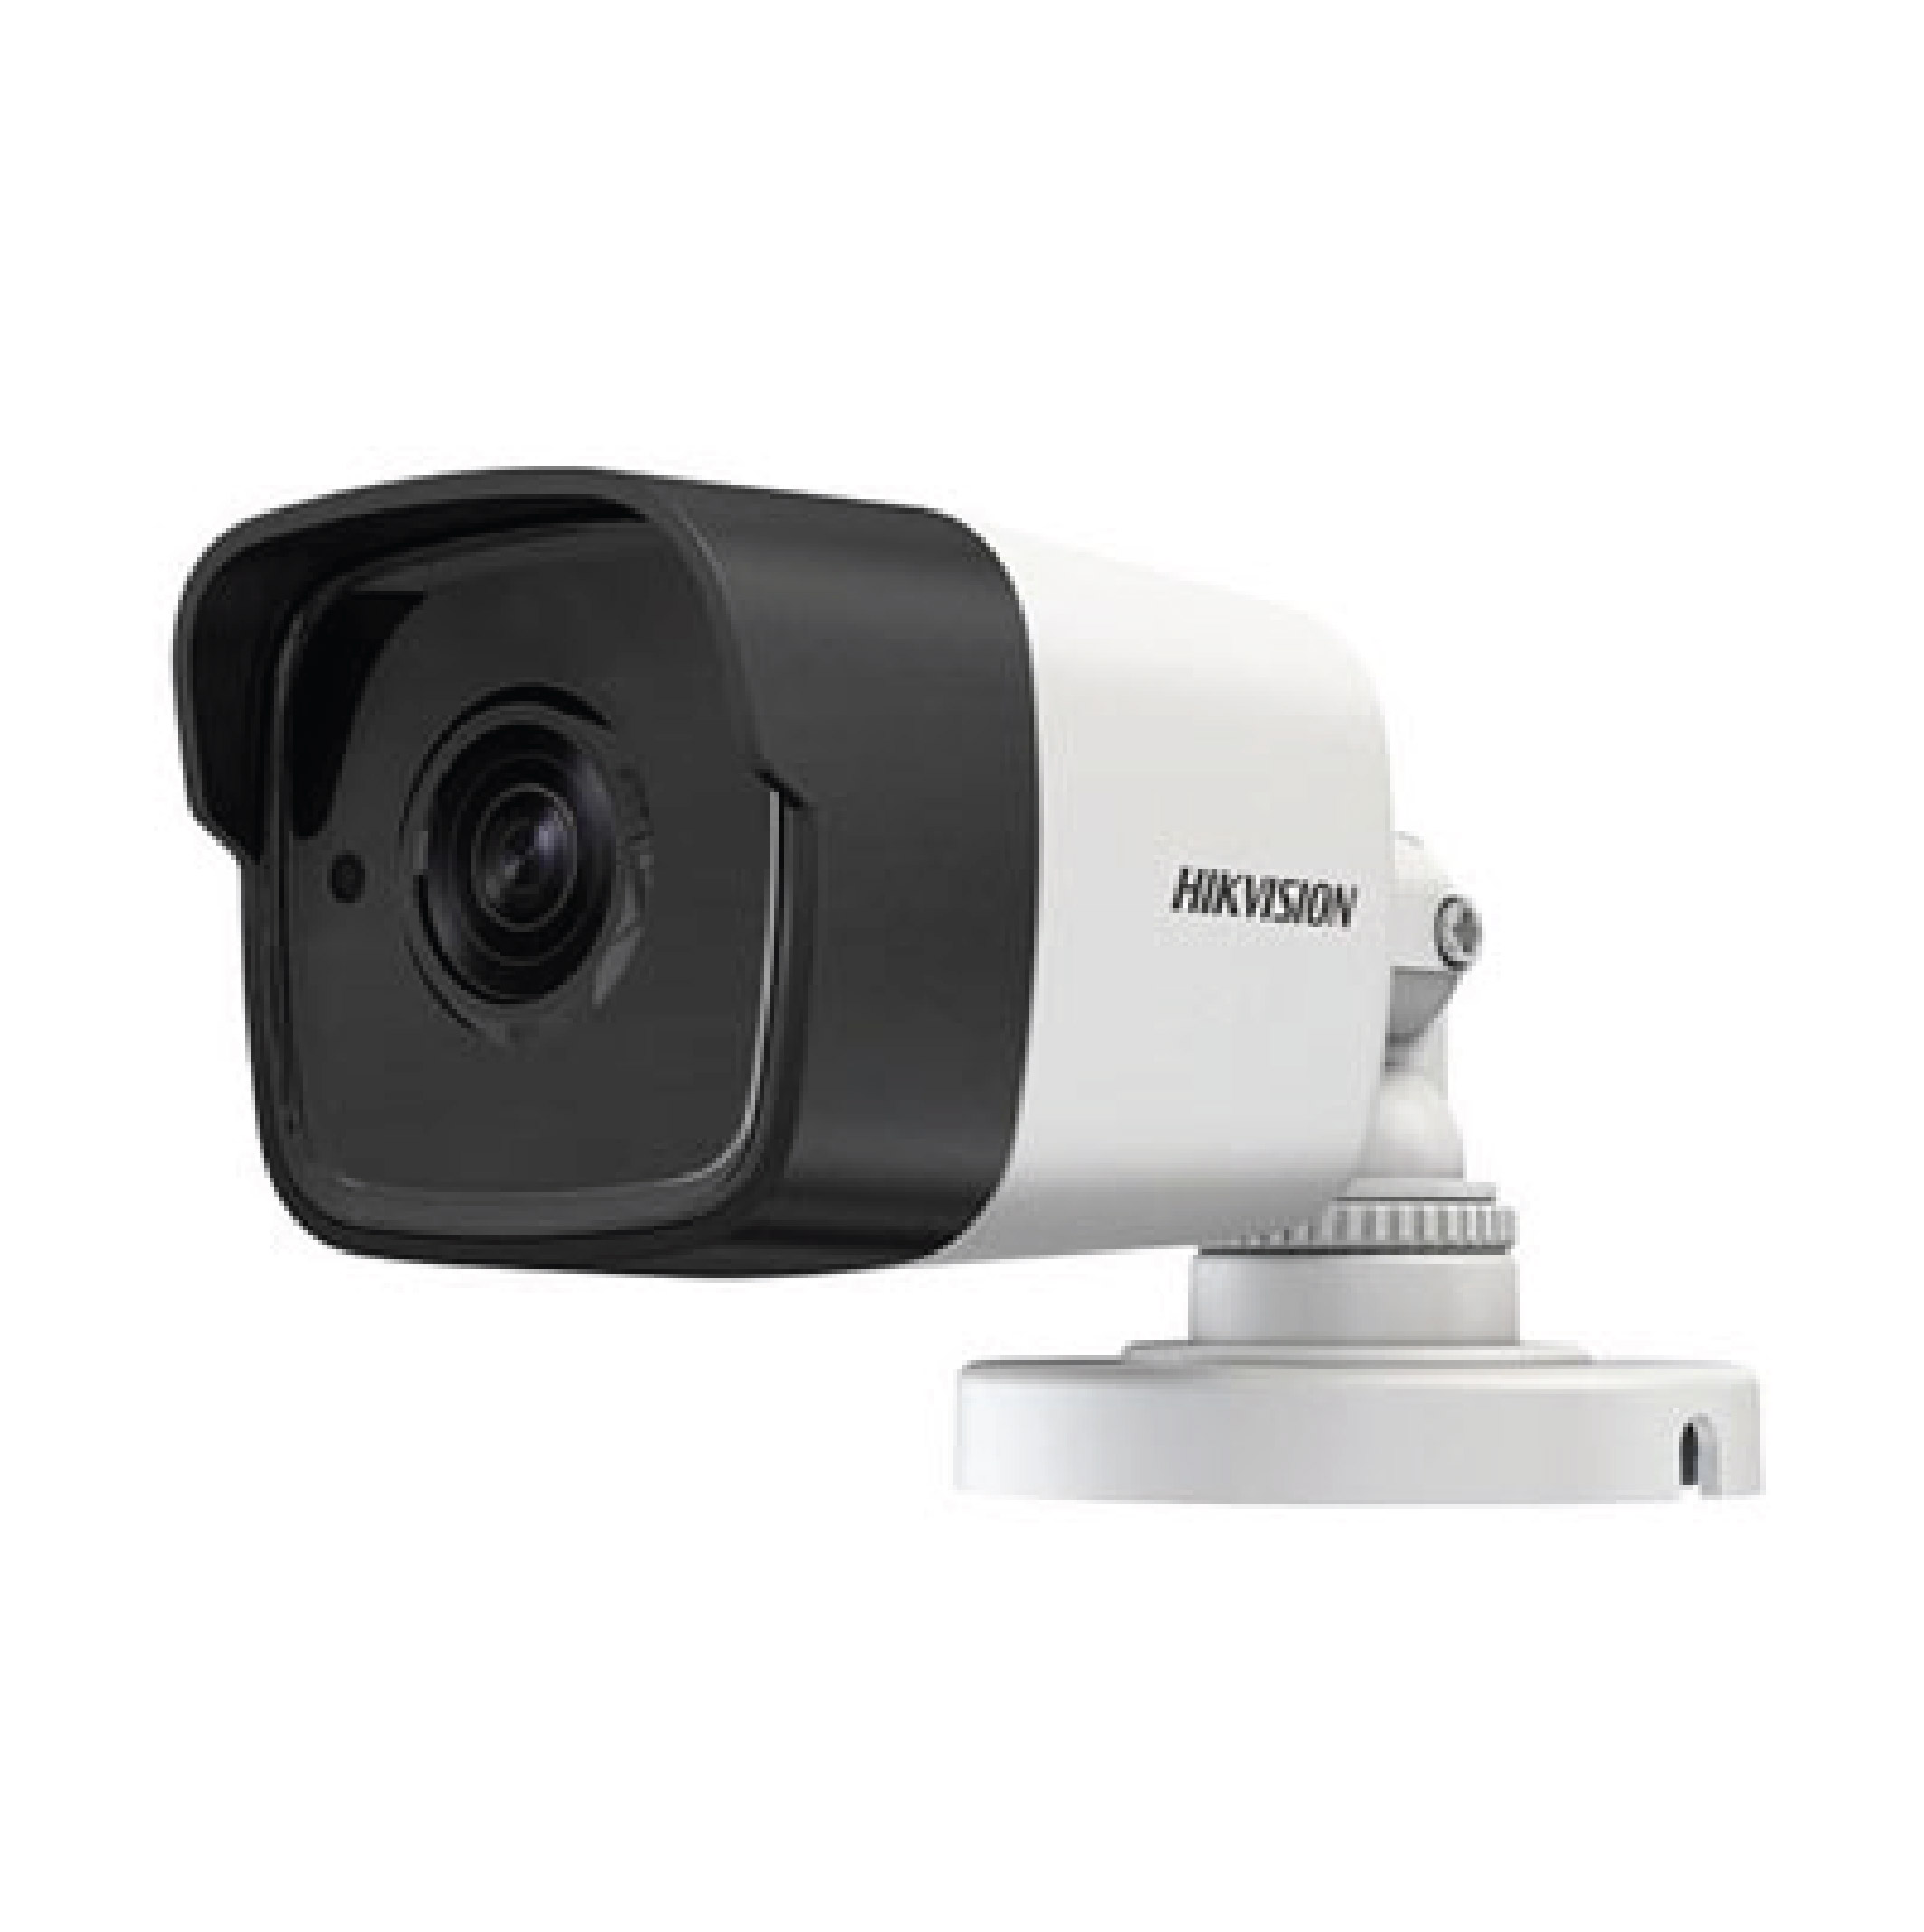 HIKVISION DS-2CE16D8T-ITPF Turbo HD Camera